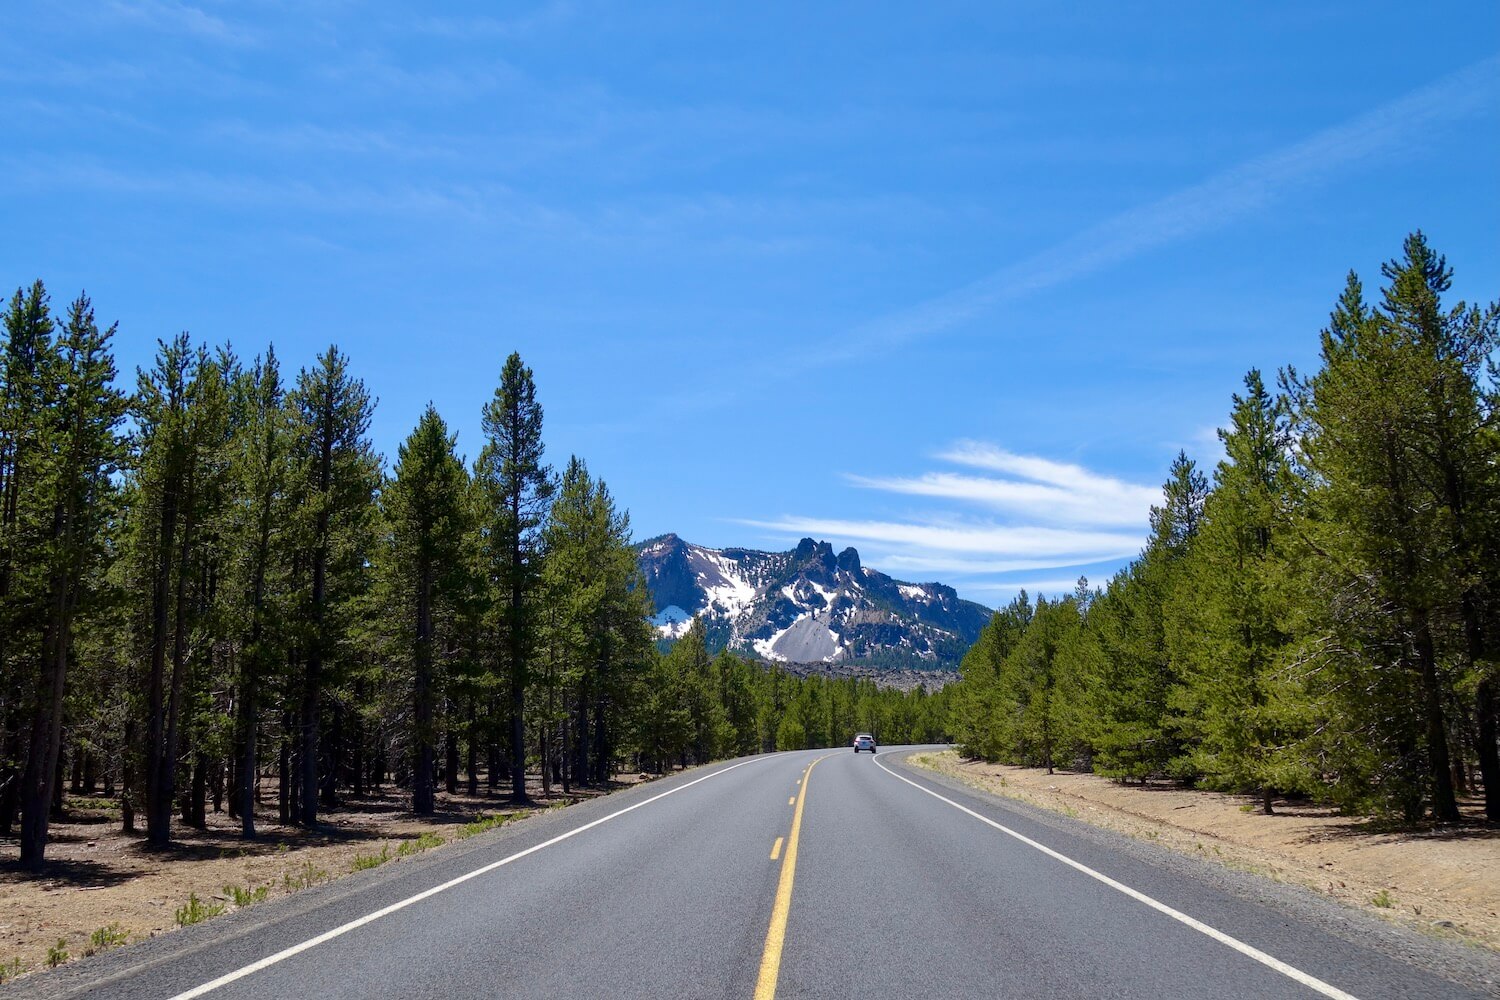 A photo taken looking at Paulina Peak on an Oregon road trip near Bend.  There are green fir trees on either side of the road and the snow covered mountain rises up above the road underneath a blue sky.